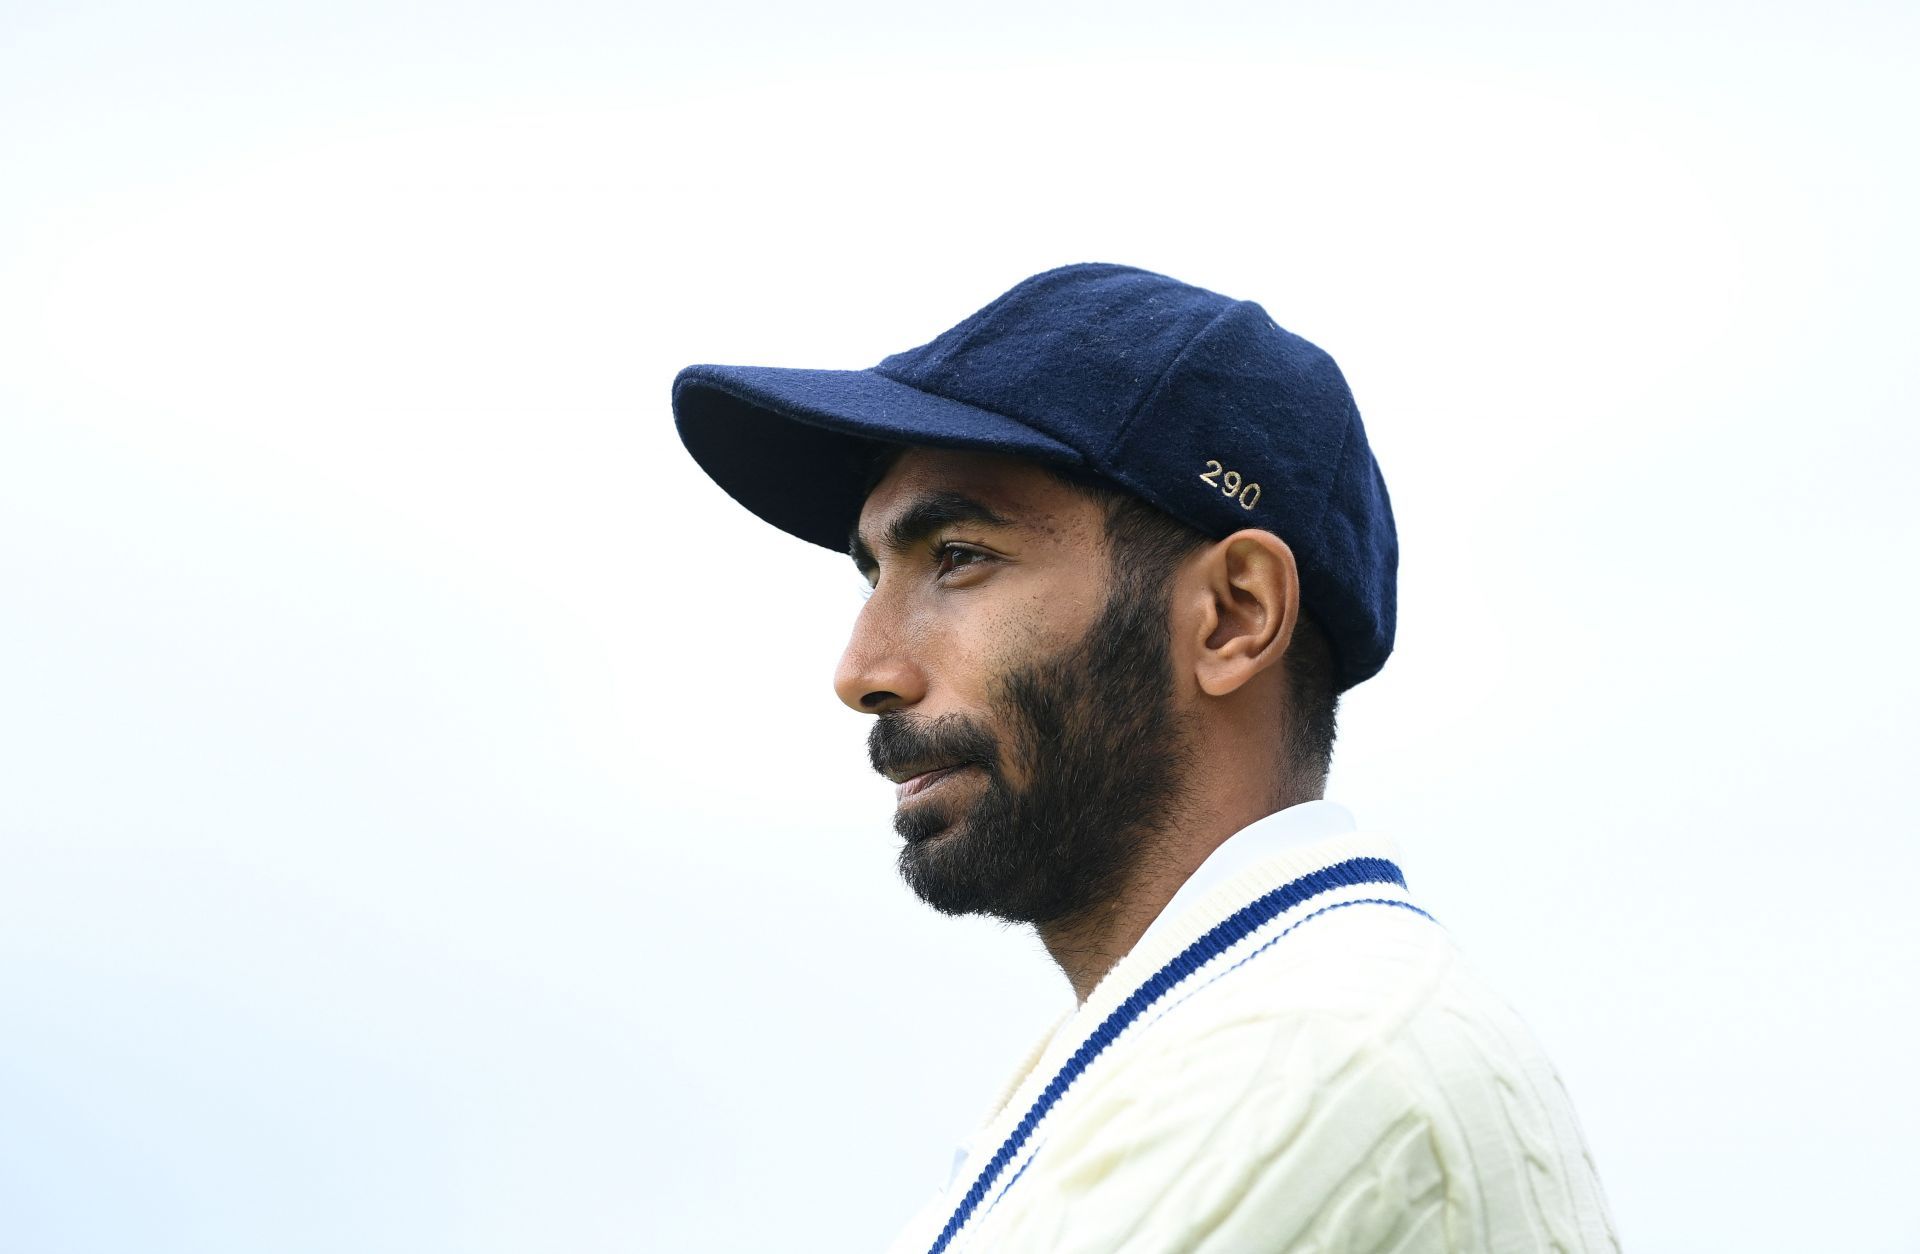 Bumrah will be the leader of the pack